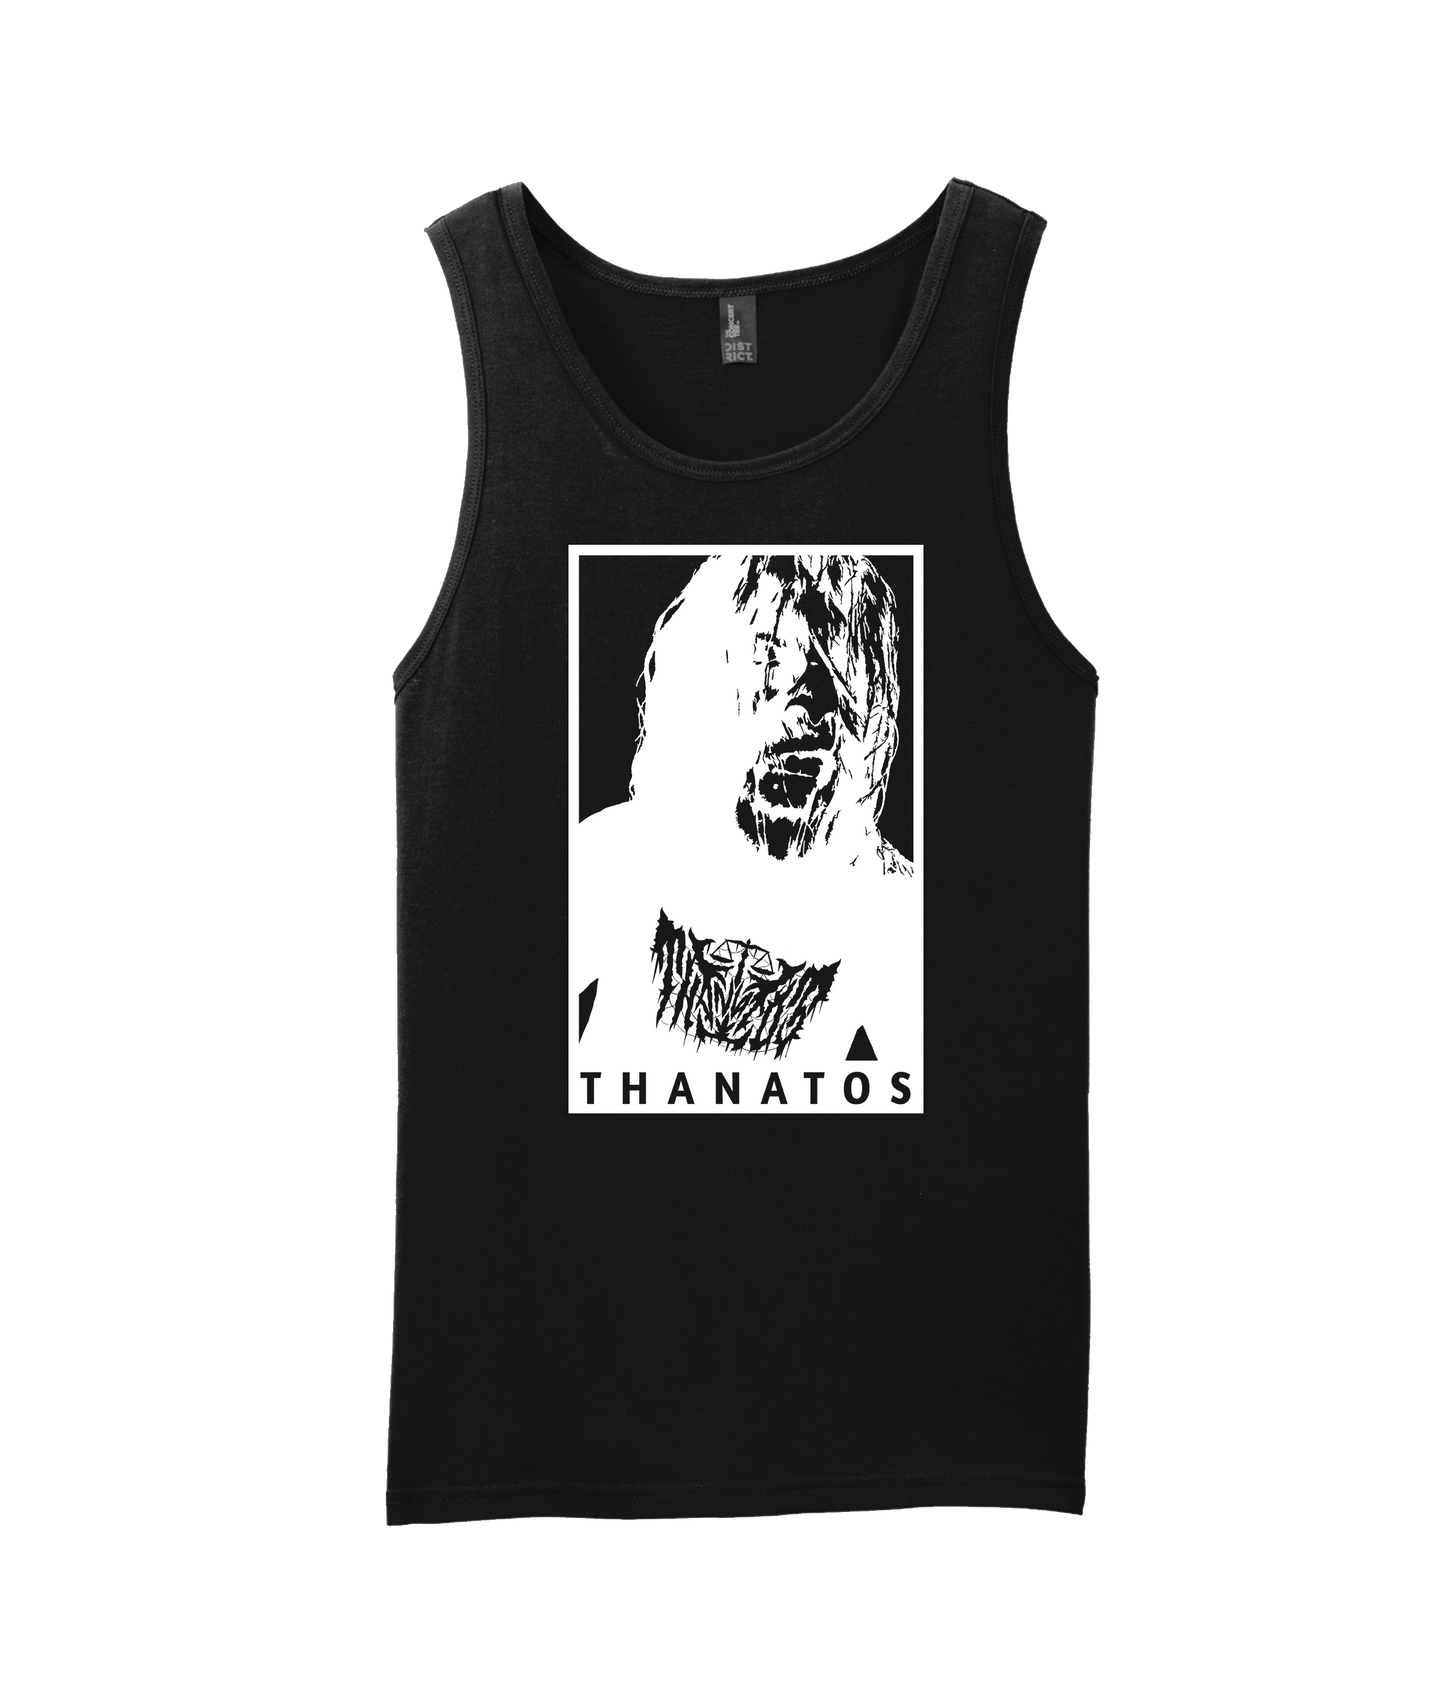 Thanatos - Better the Devil You Know Than the One You Don't - Black Tank Top